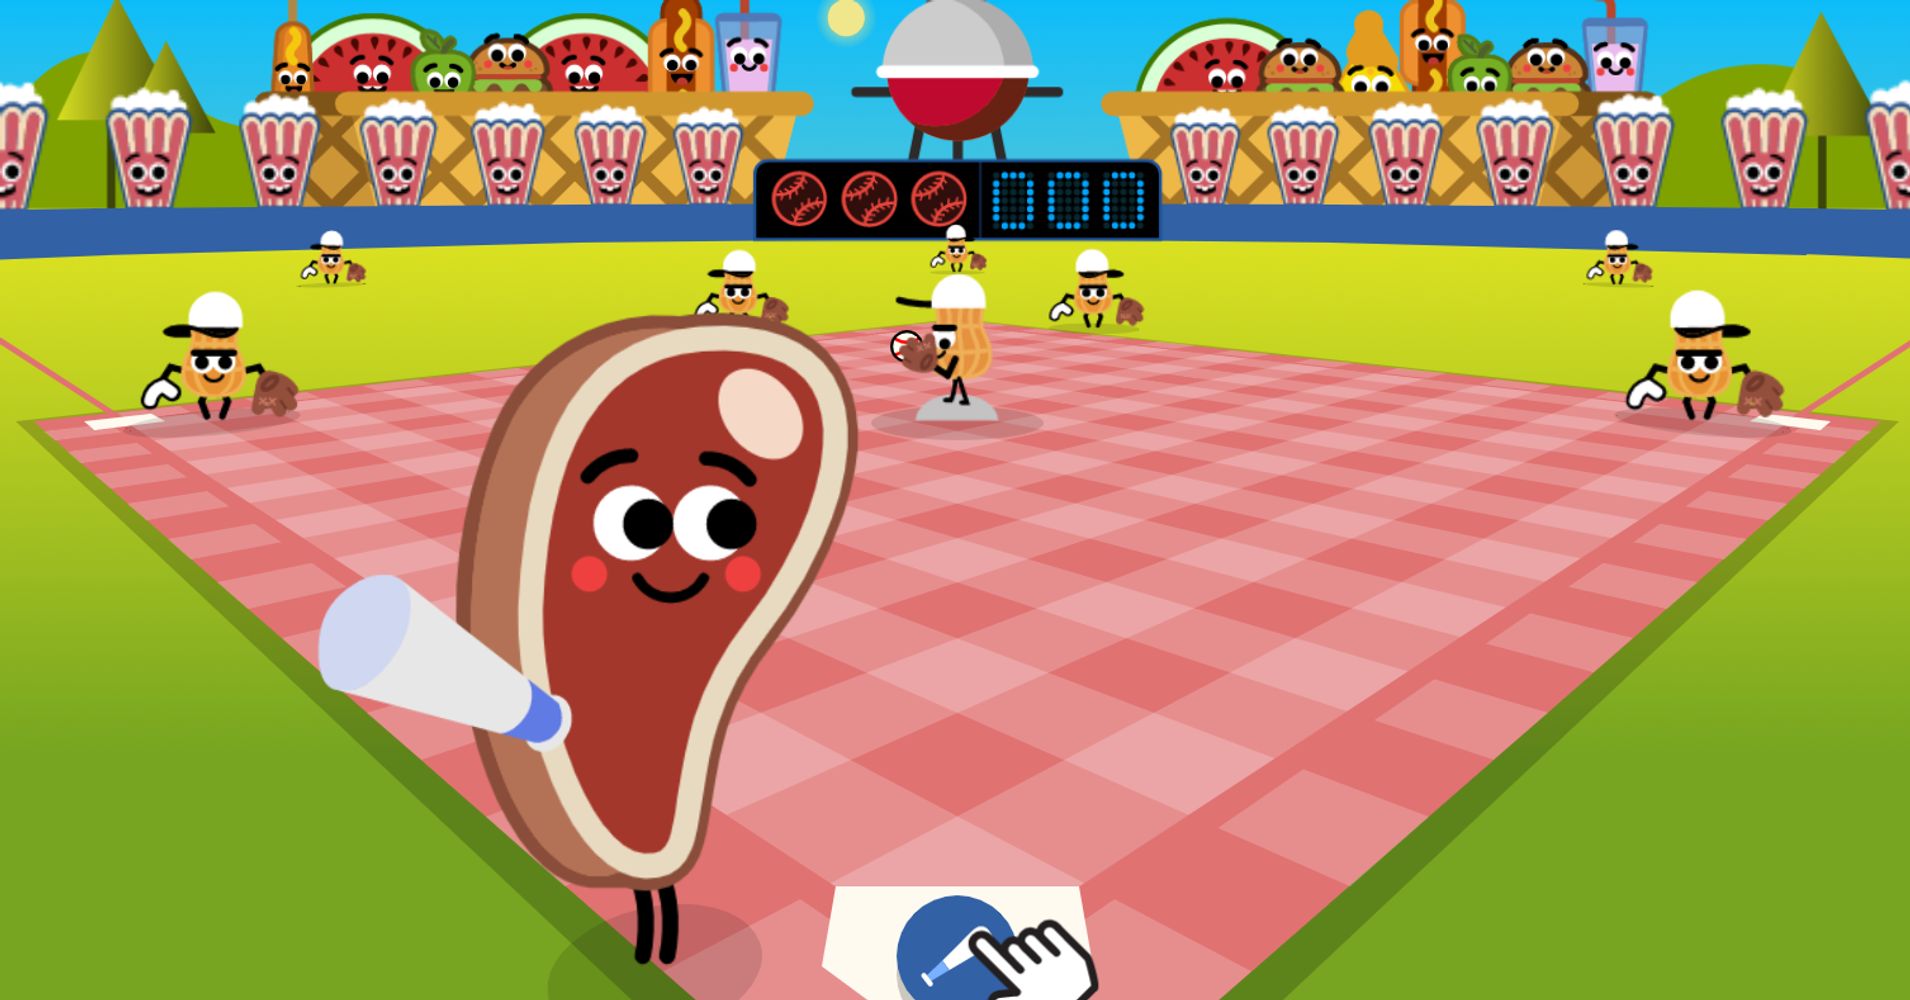 Google Games Baseball / Bored before the holiday? Go play the game